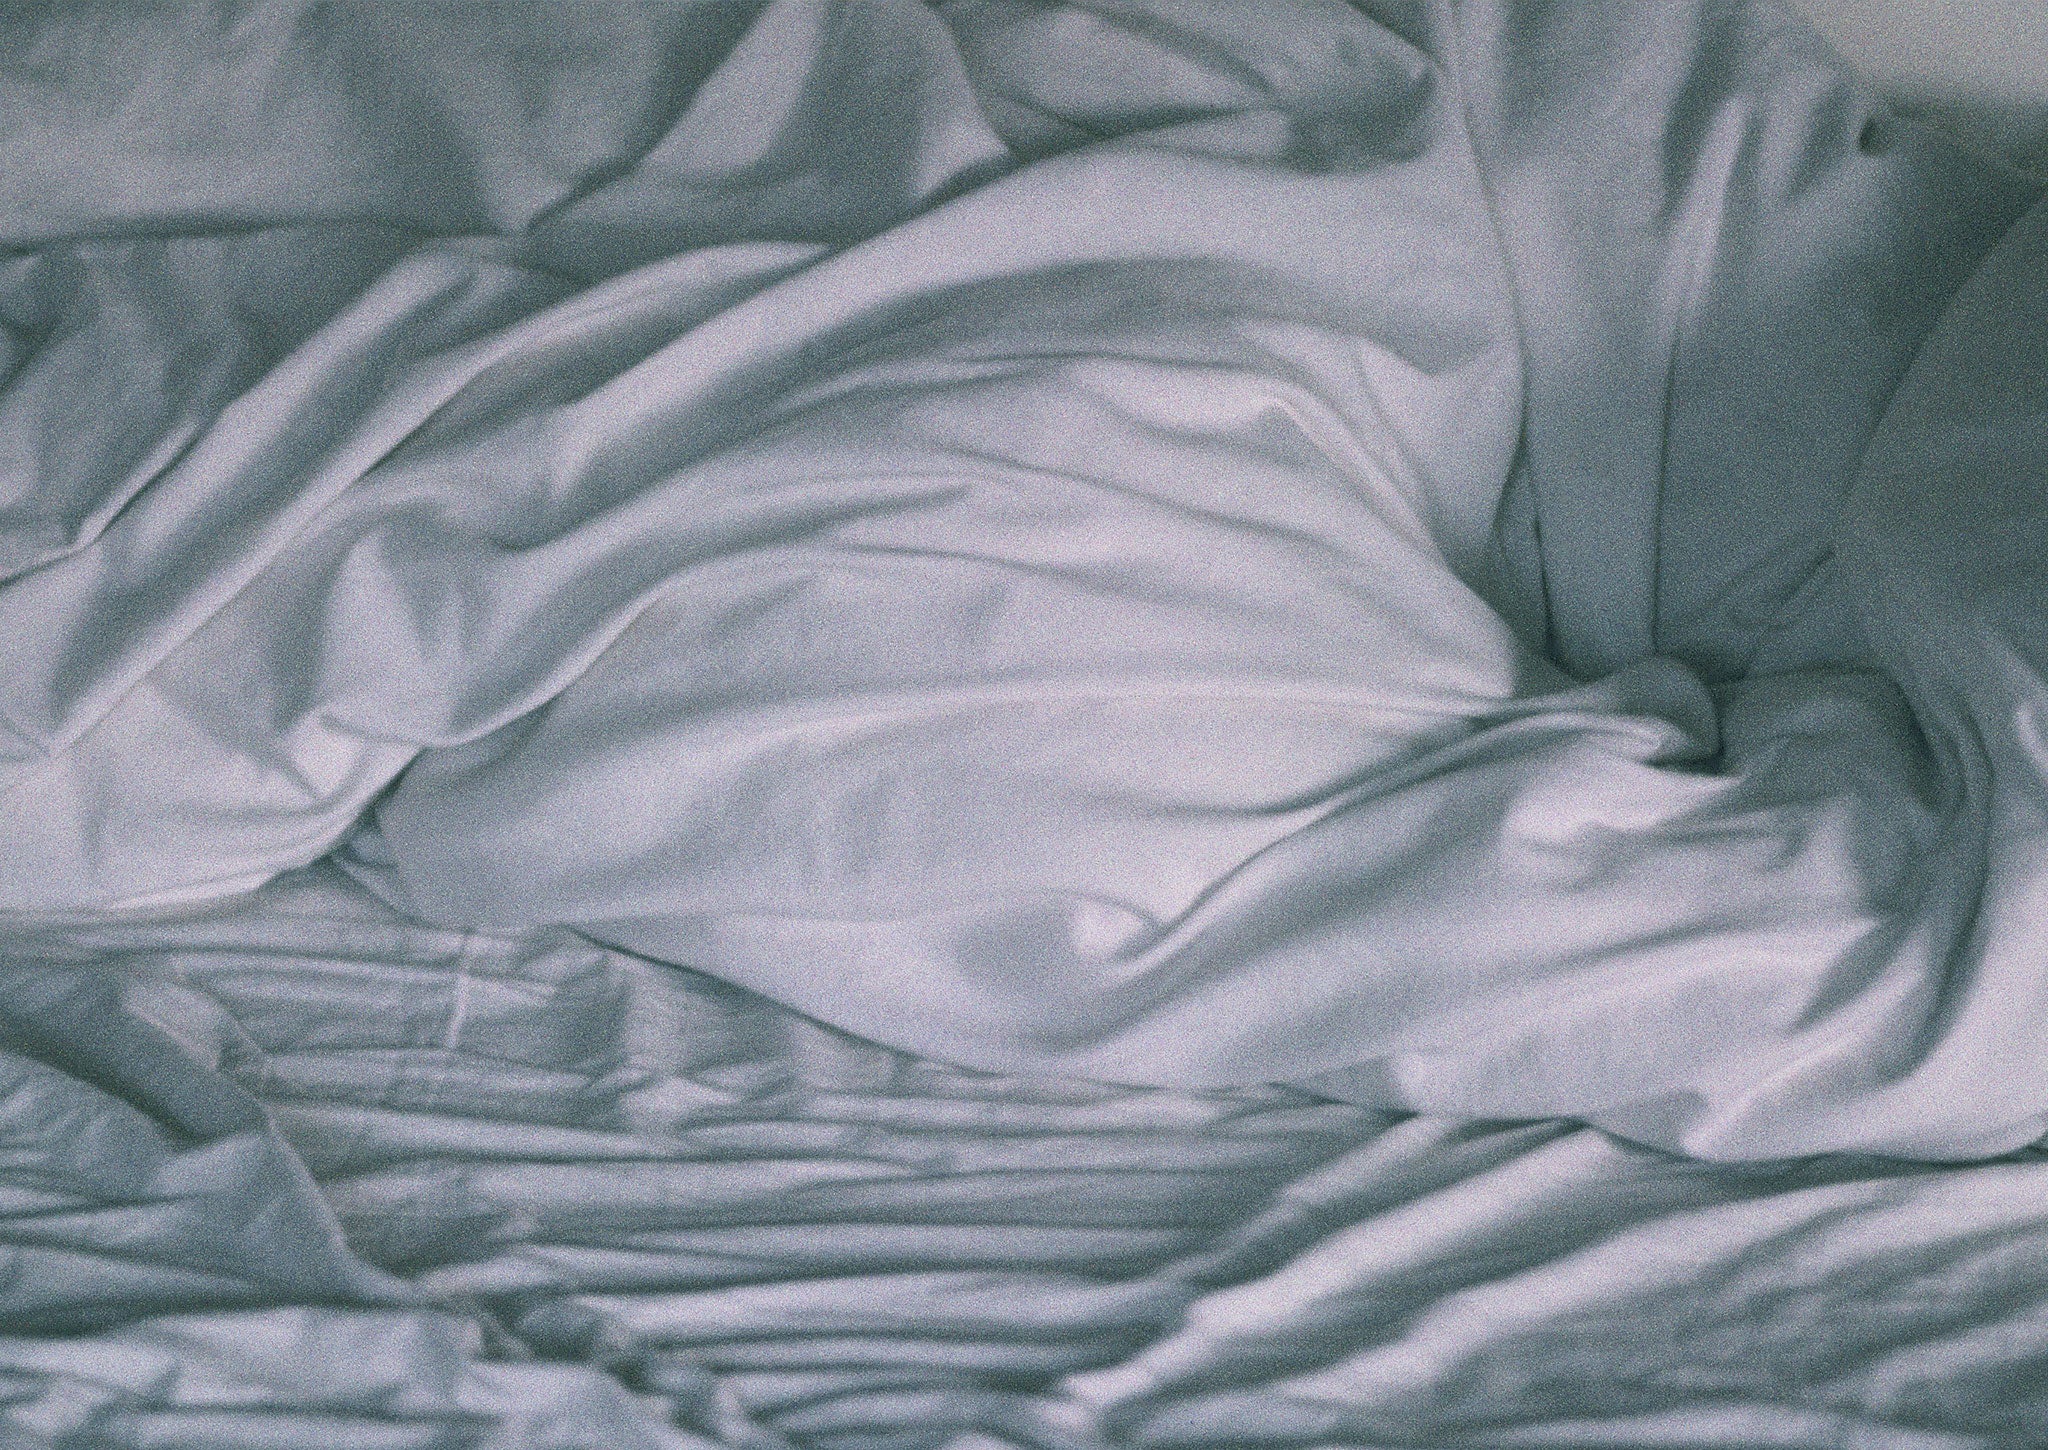 Crumpled bed sheets